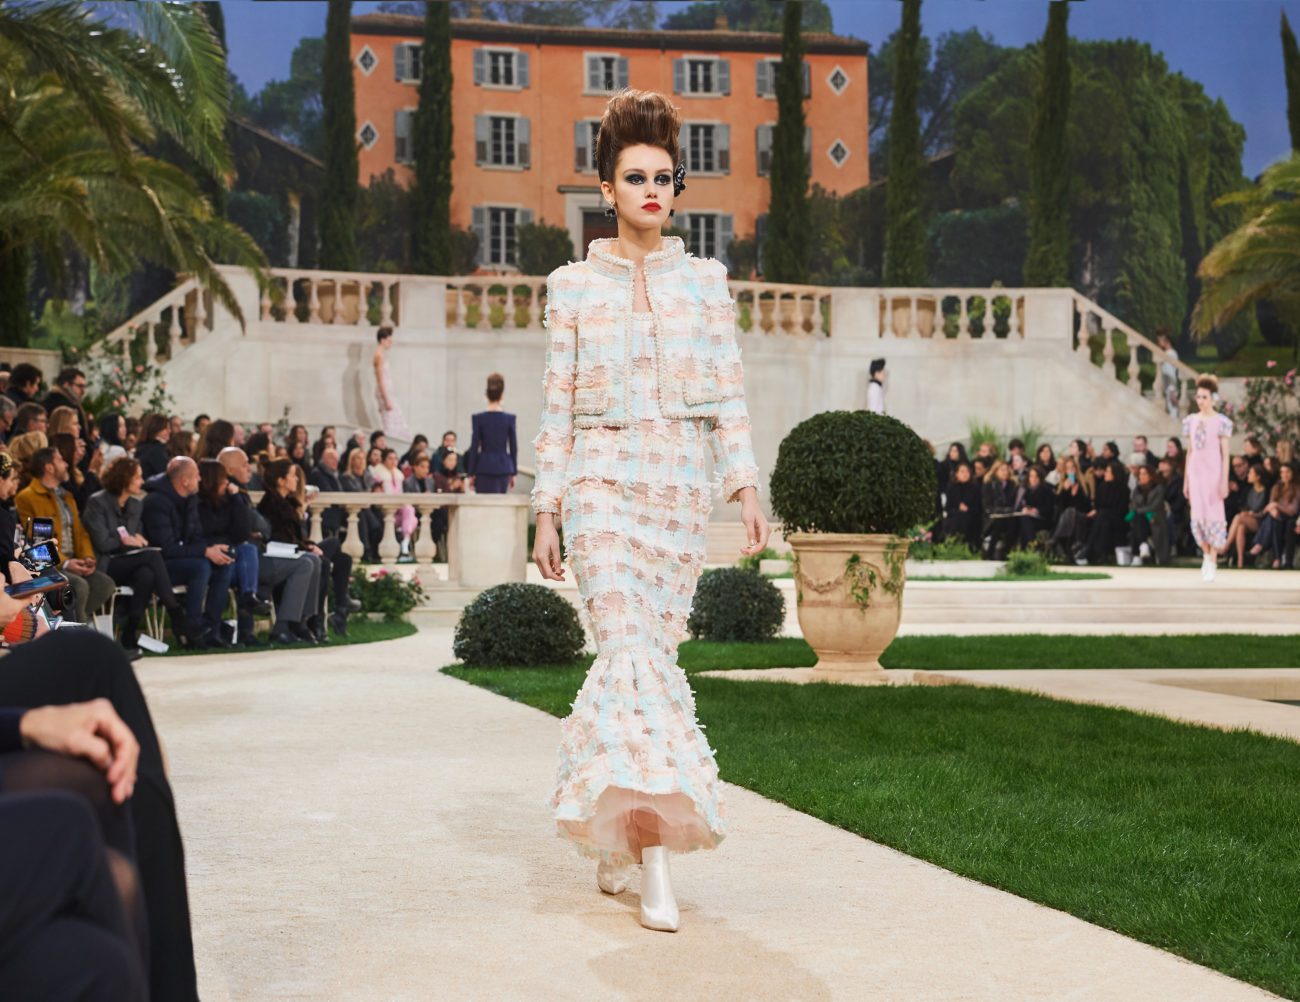 Chanel Spring Summer 2019 Haute Couture Collection, Courtesy of Chanel